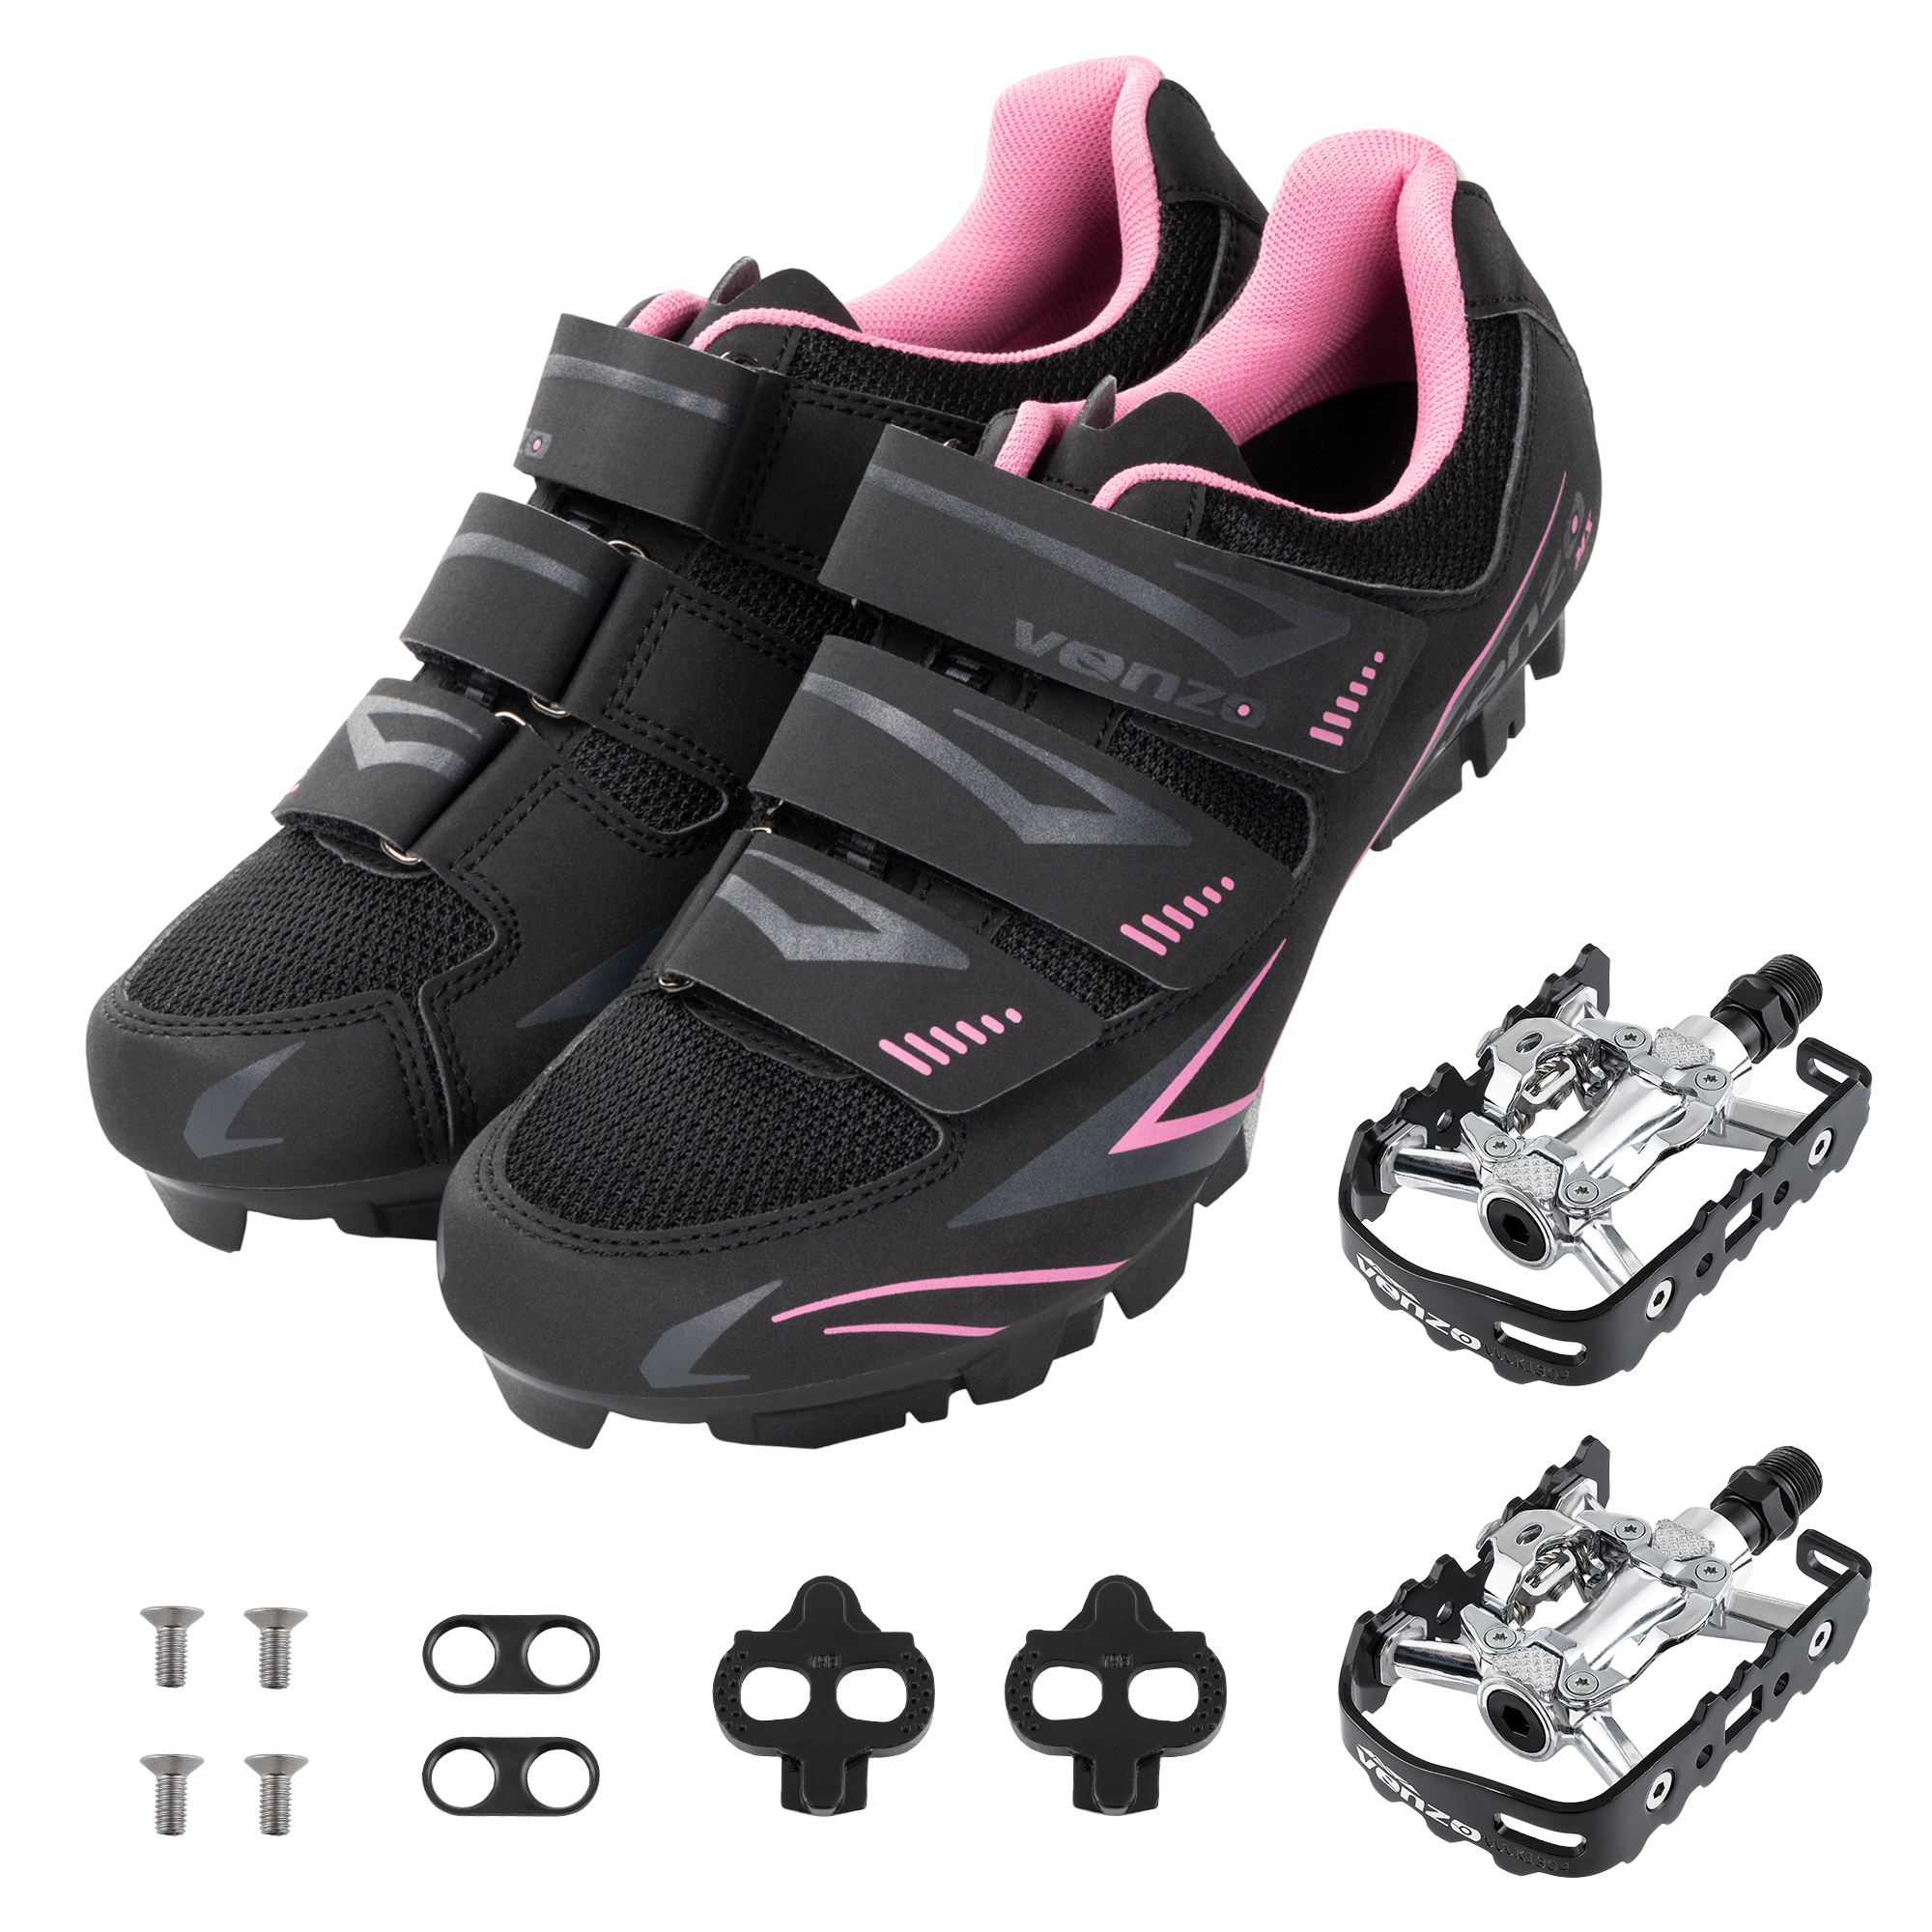 Venzo Mountain MTB Bike Bicycle Women’s Cycling Shoes With Multi-Function Clipless Pedals & Cleats - Compatible With Shimano SPD & Crankbrother System